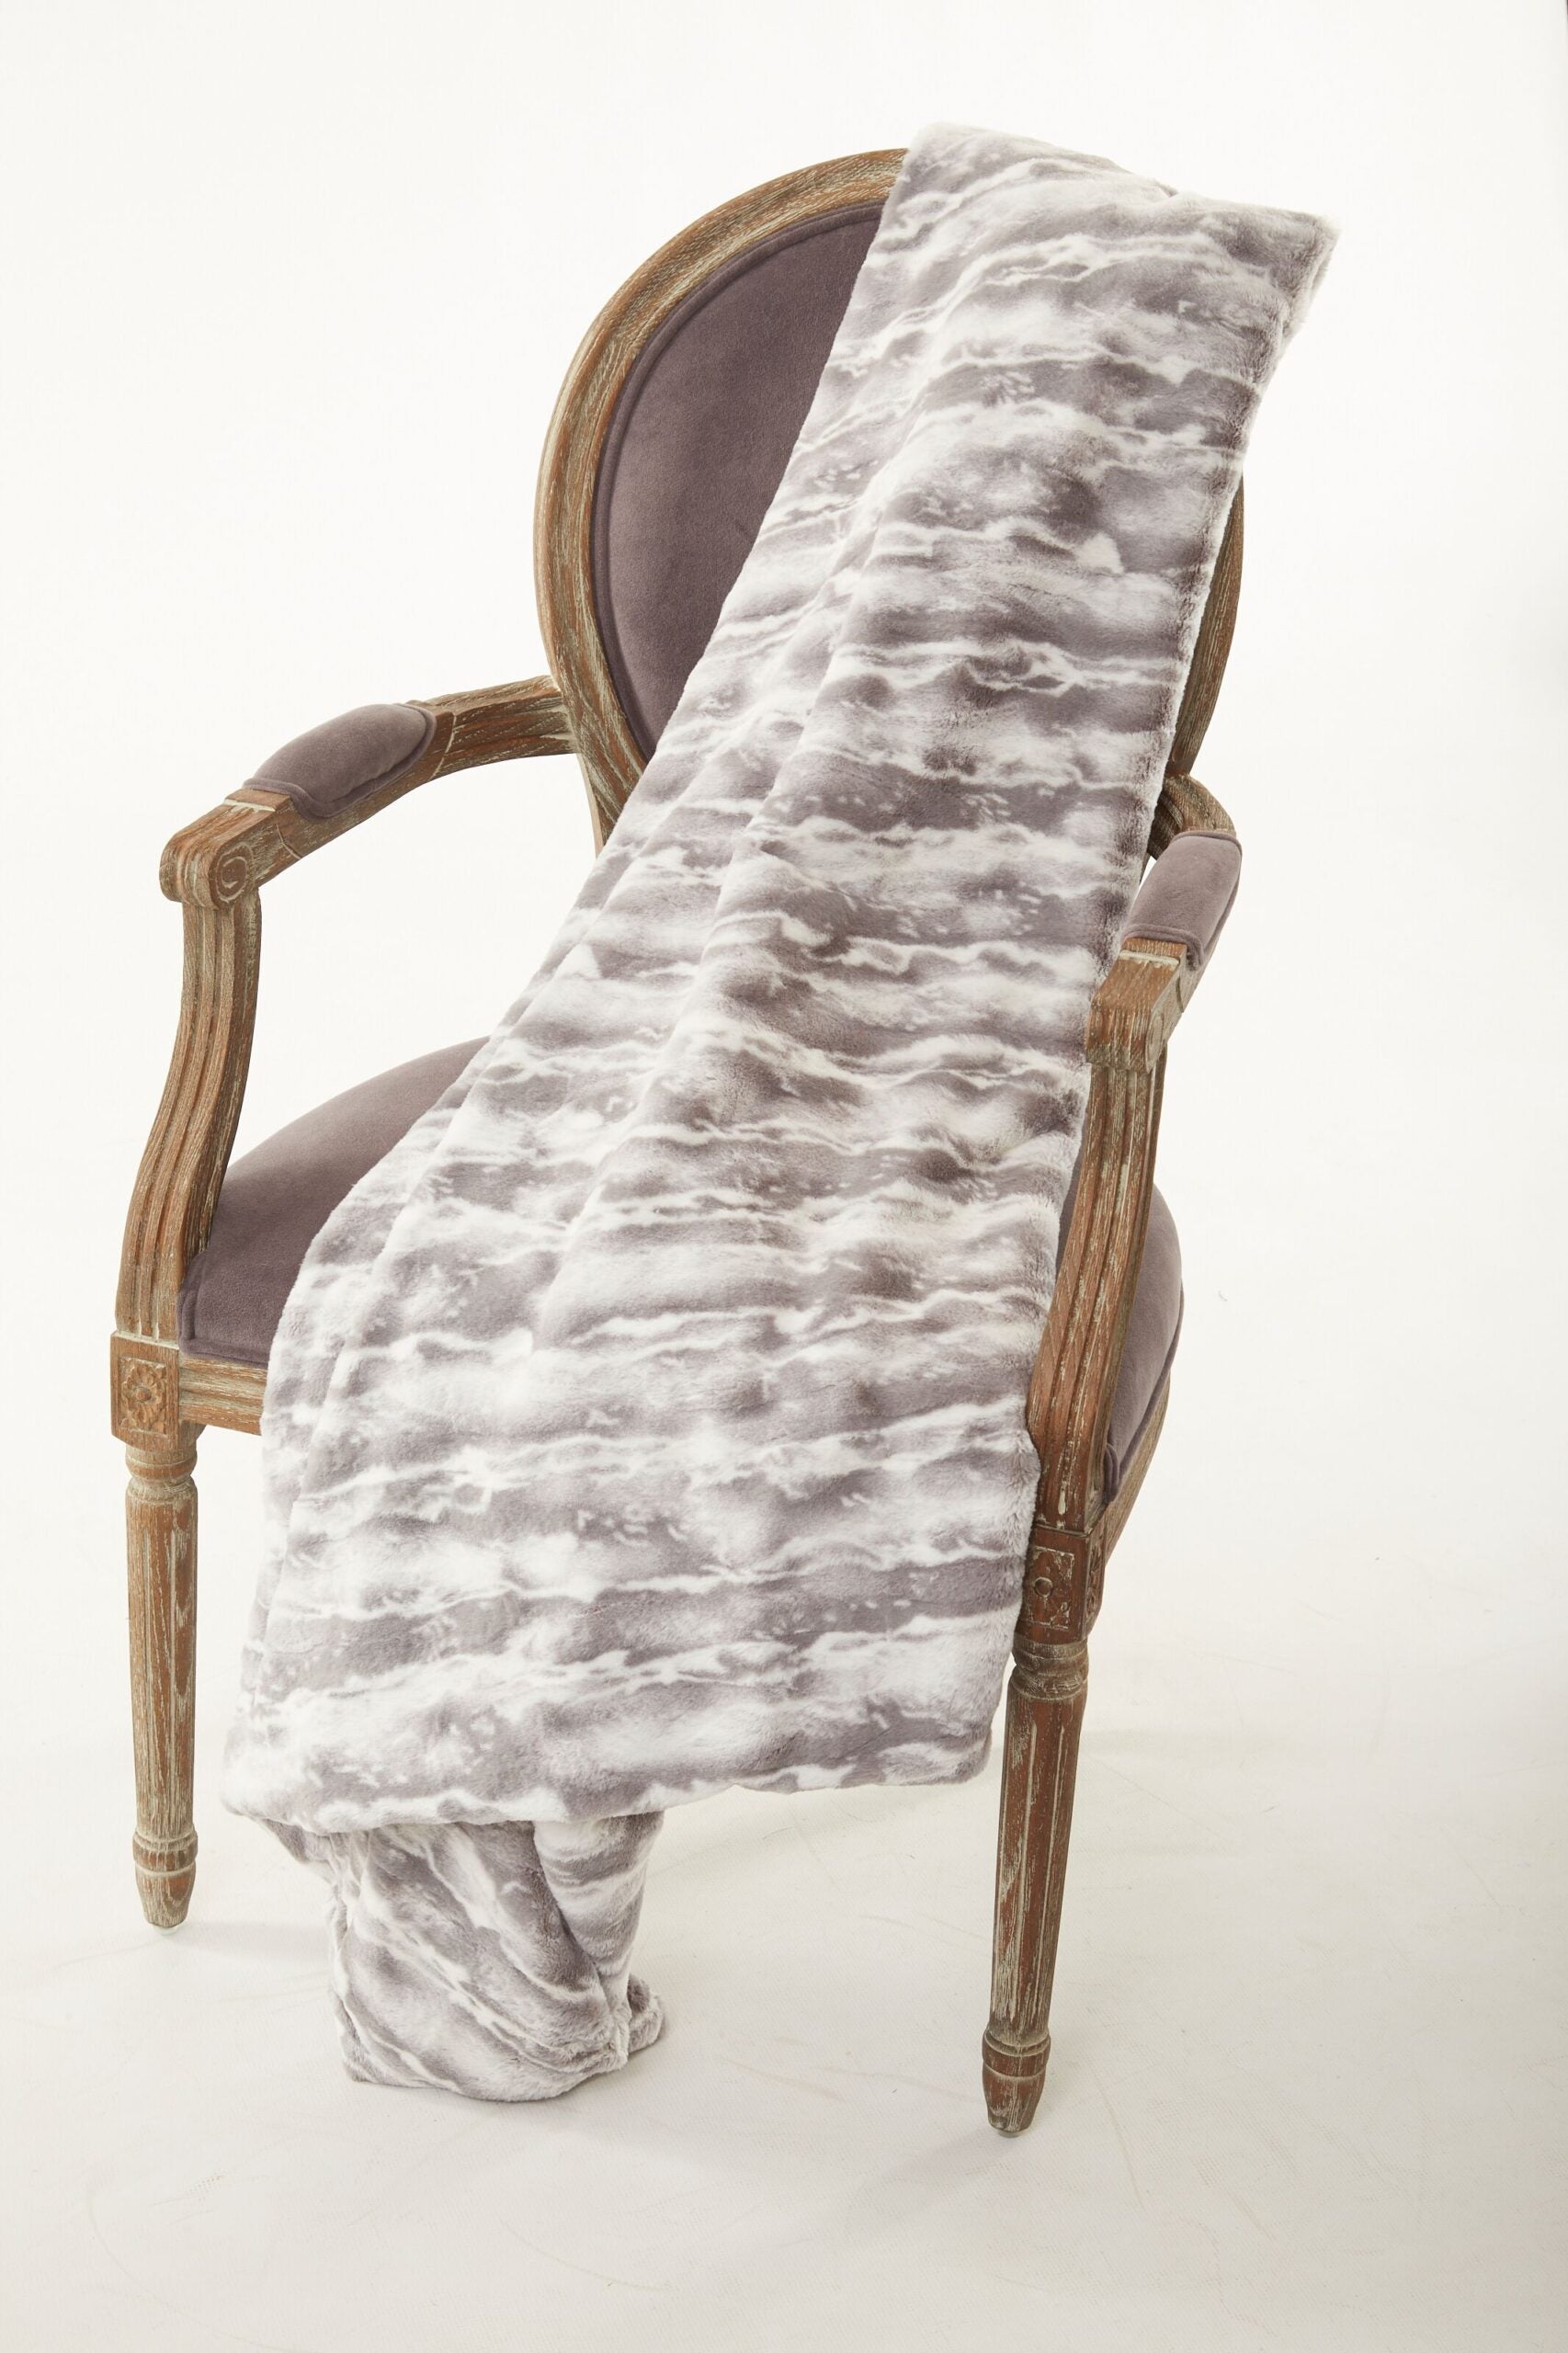 Sydney Throw – Silver and Ivory on brown chair